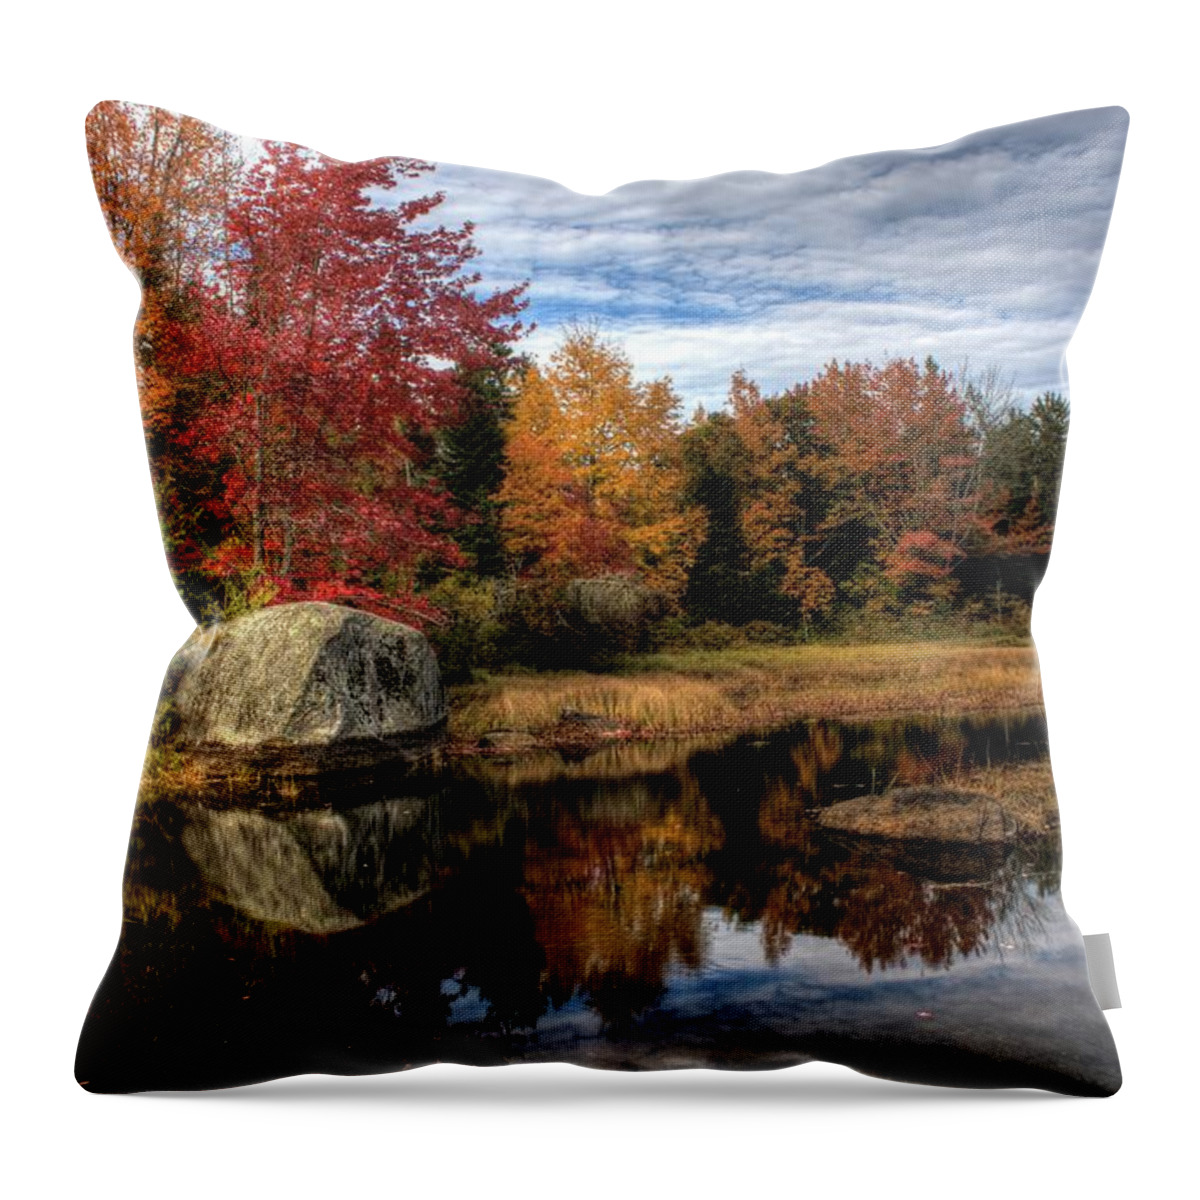 Hdr Throw Pillow featuring the photograph Autumn In Maine #2 by Greg DeBeck